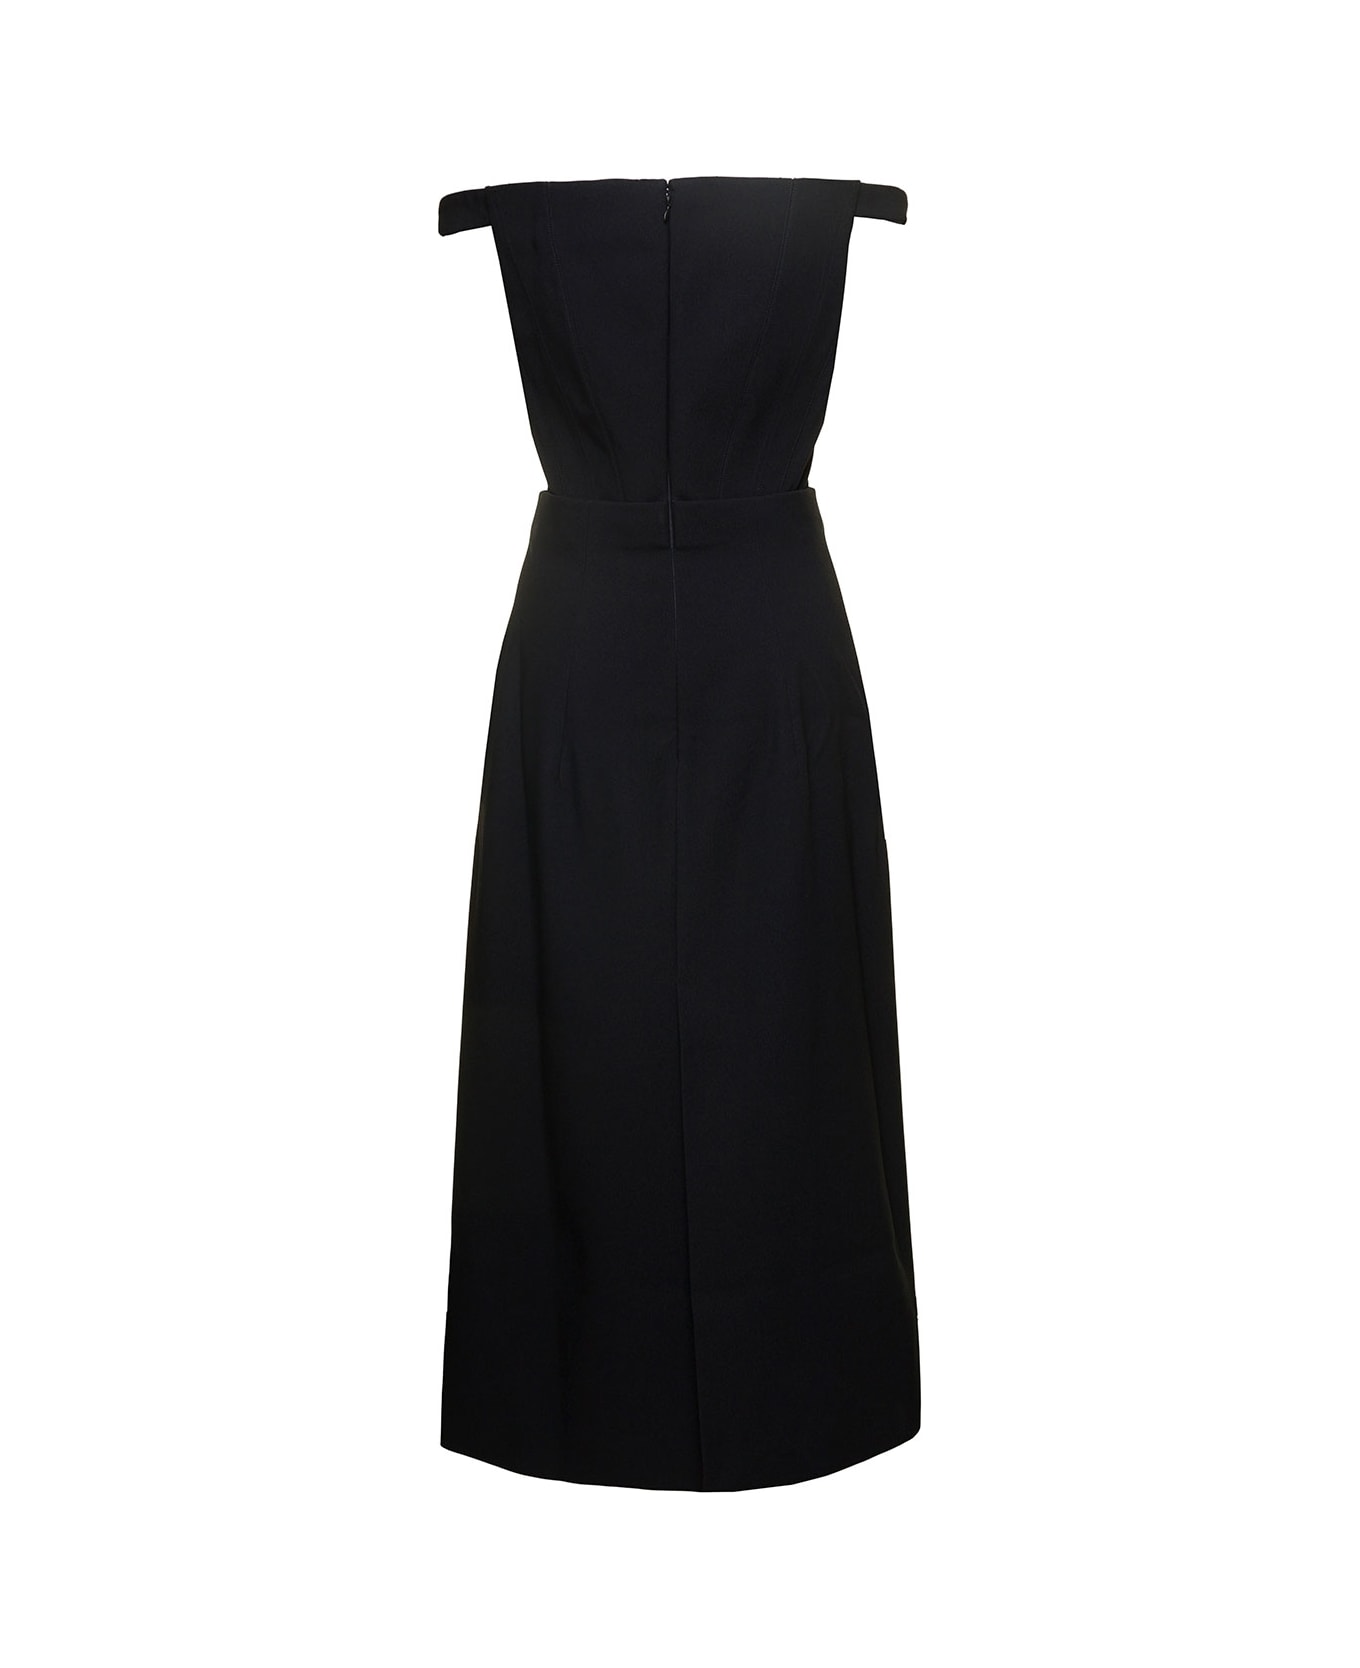 Solace London Black Midi Dress With Flared Skirt And Asymmetric Vent In Polyester Woman - Black ワンピース＆ドレス